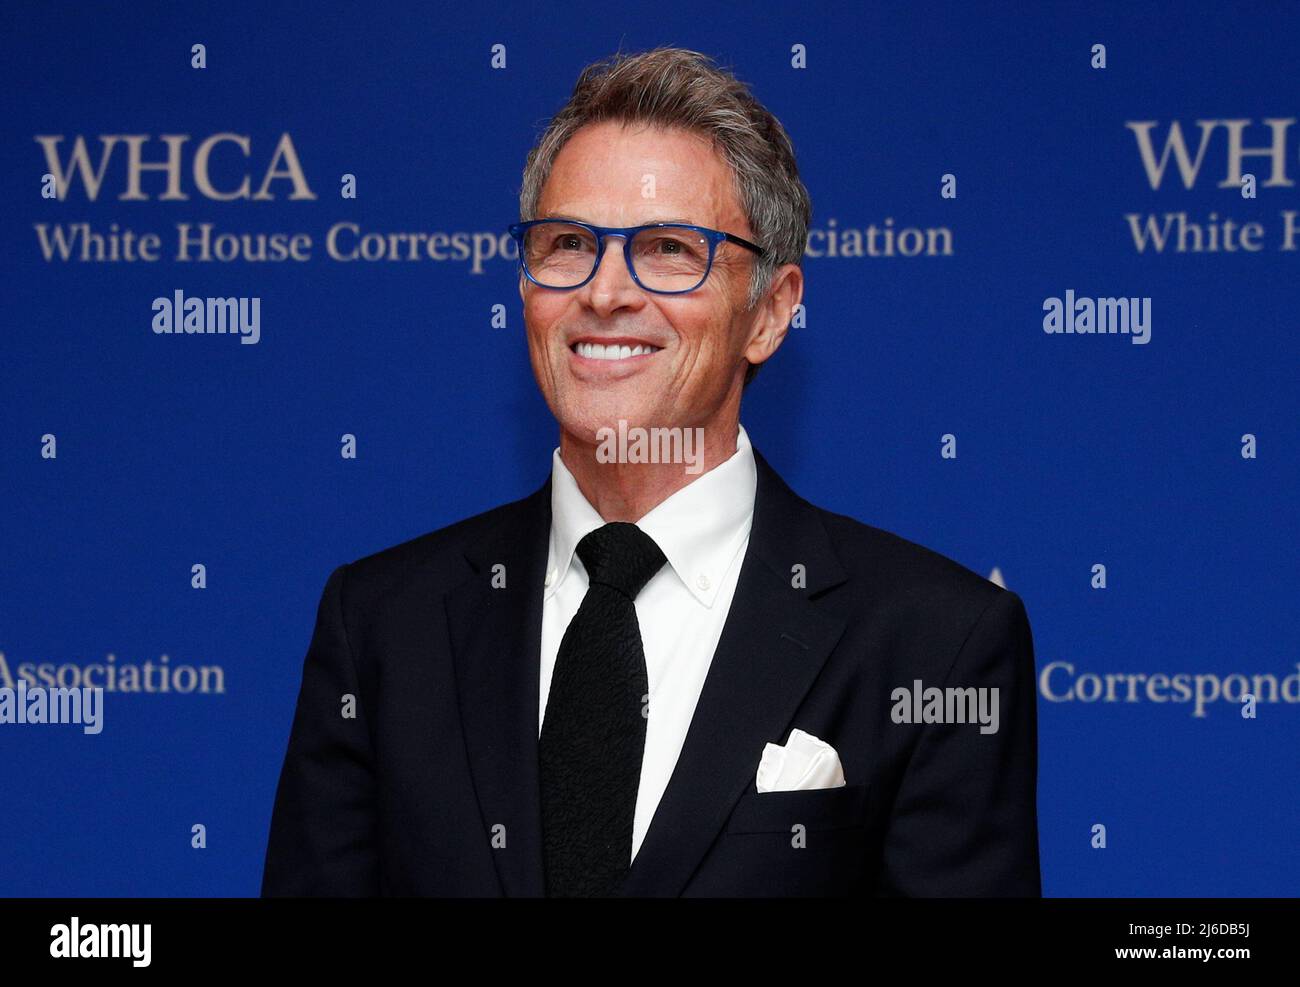 Actor Tim Daly arrives on the red carpet for the White House Correspondents' Association Dinner in Washington, U.S., April 30, 2022. REUTERS/Tom Brenner Stock Photo - Alamy